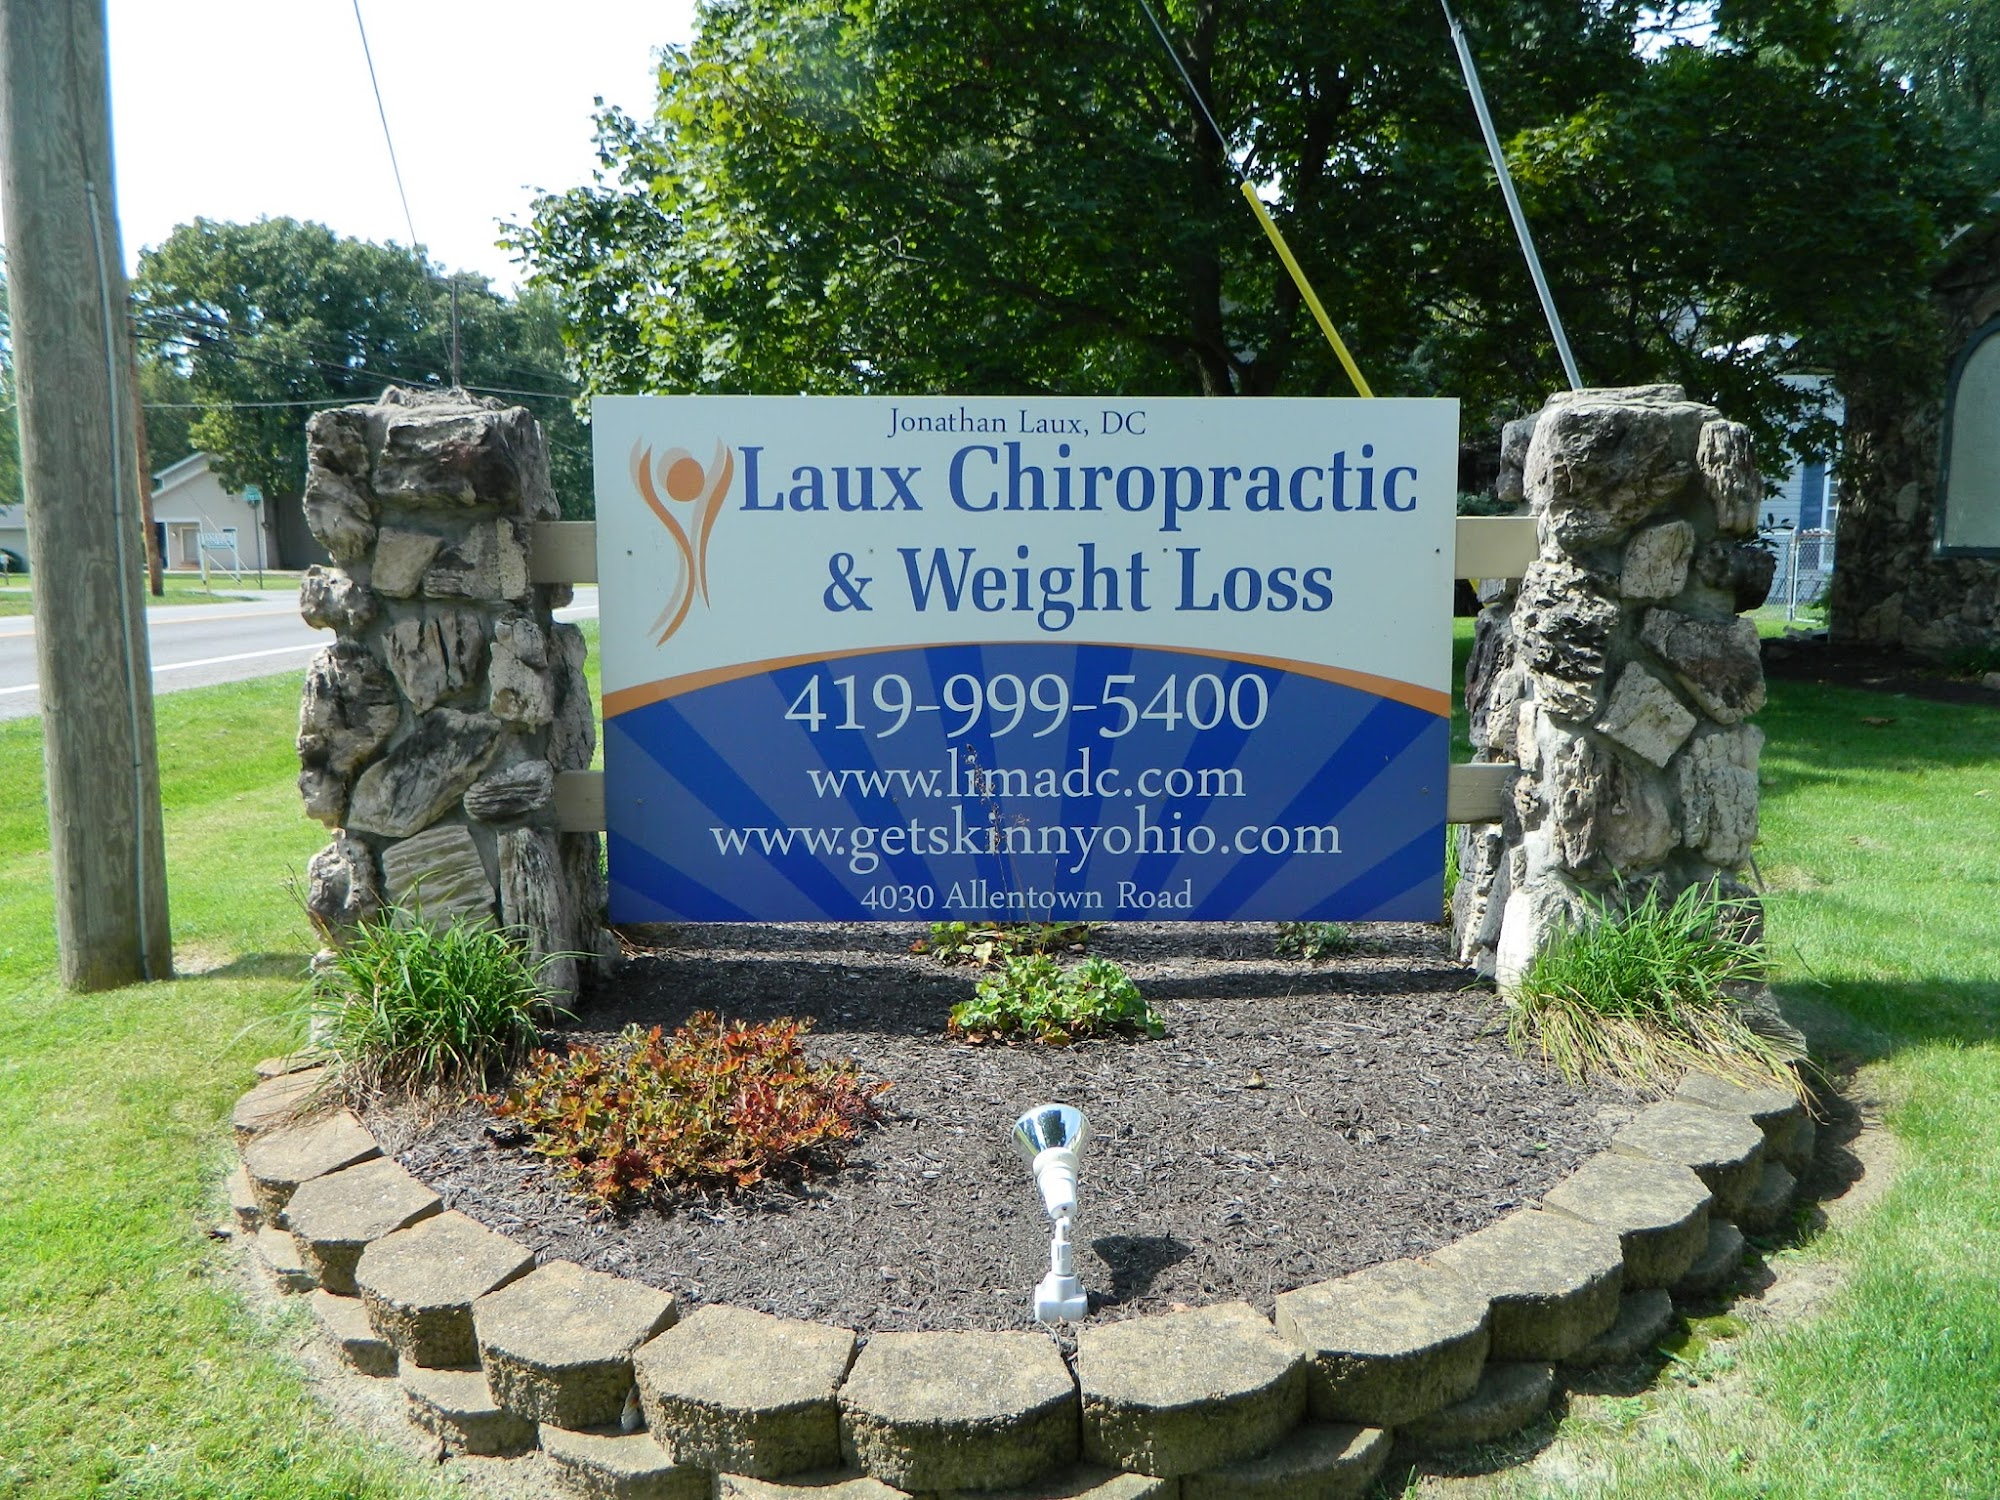 Laux Chiropractic and Weight Loss